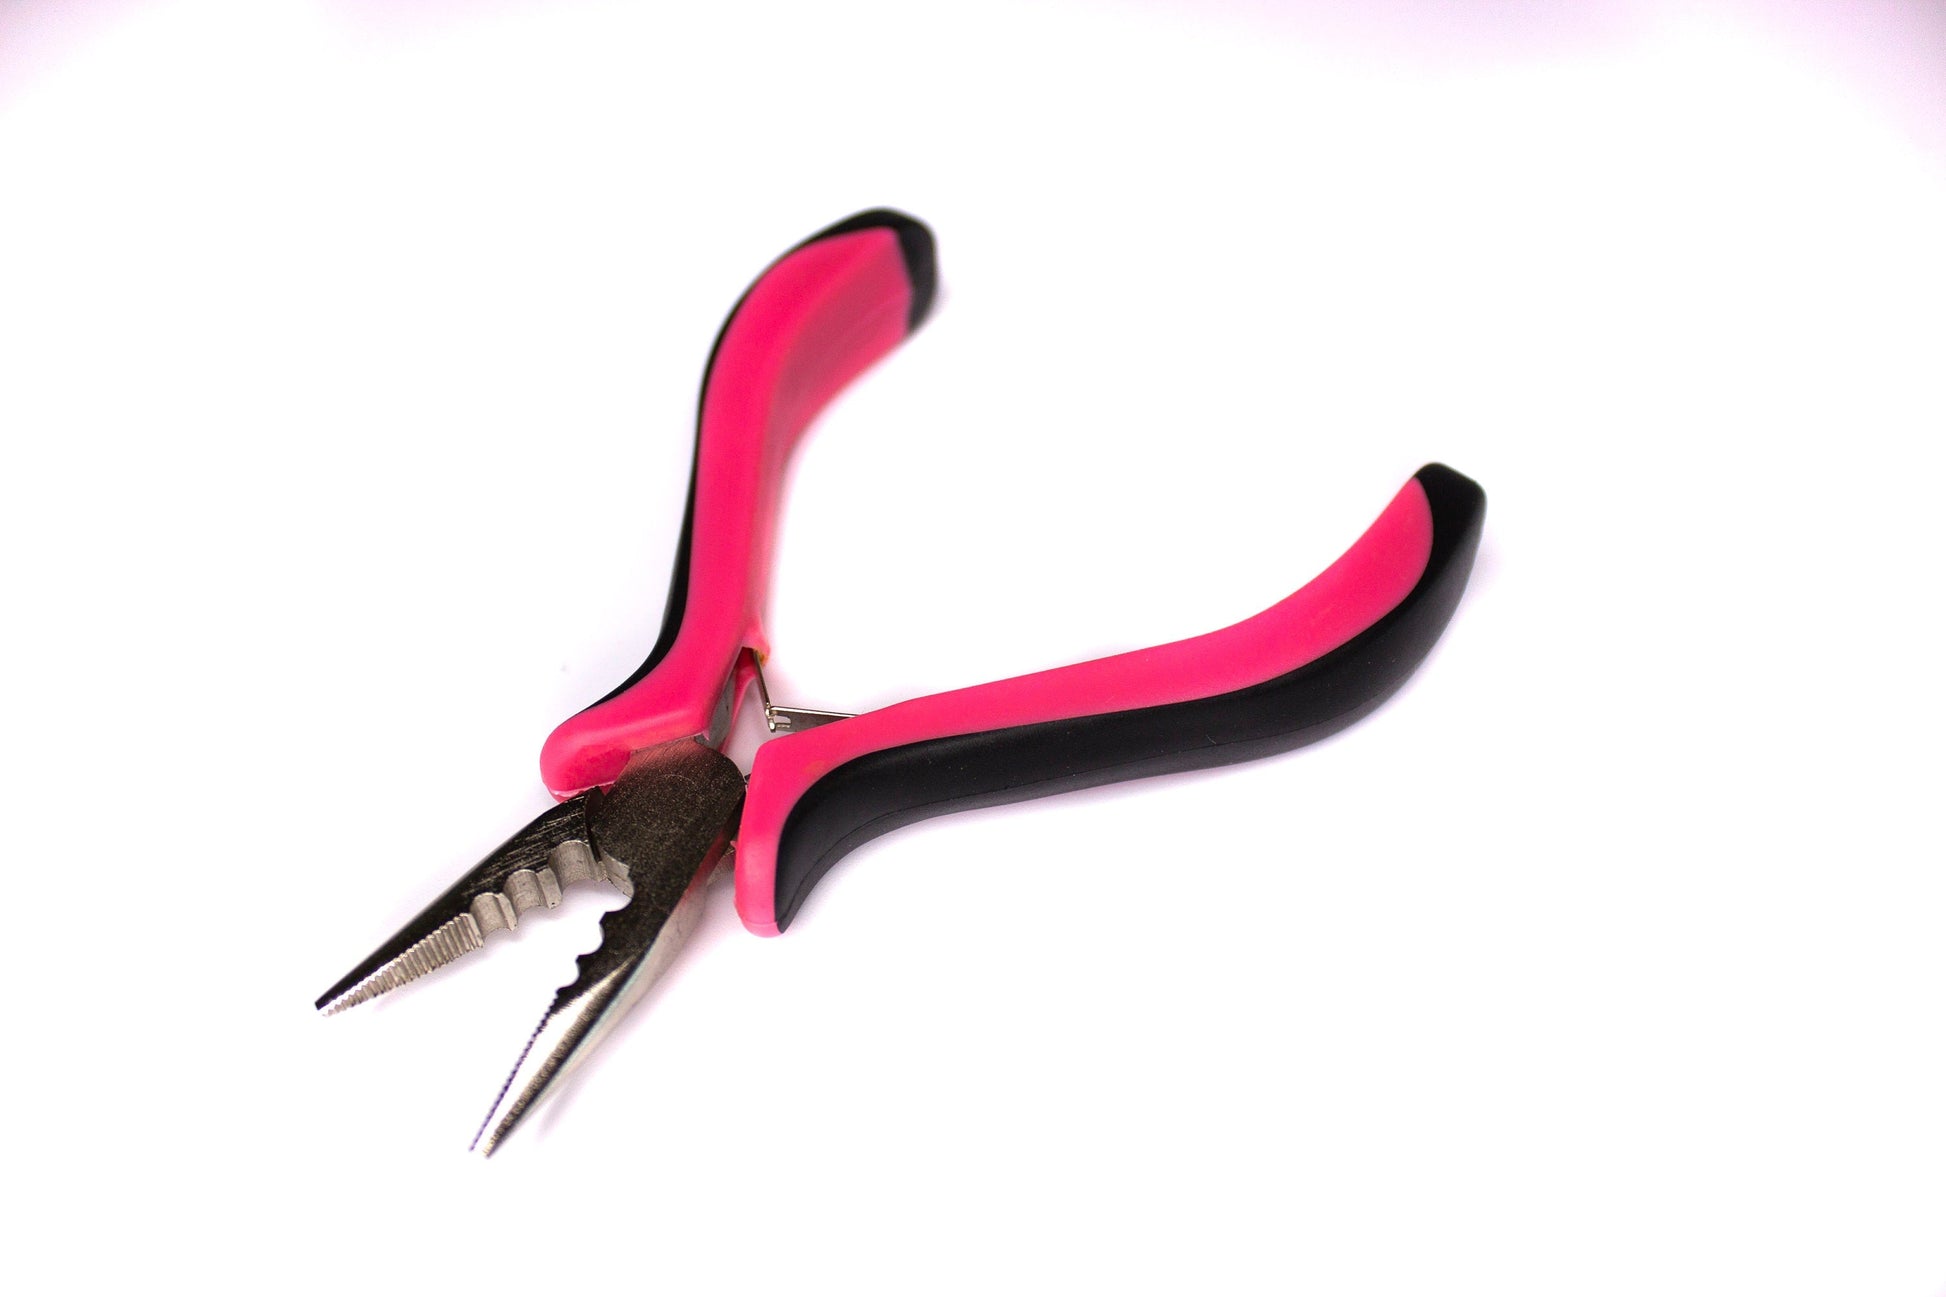 Hair Extensions pliers for micro beads.